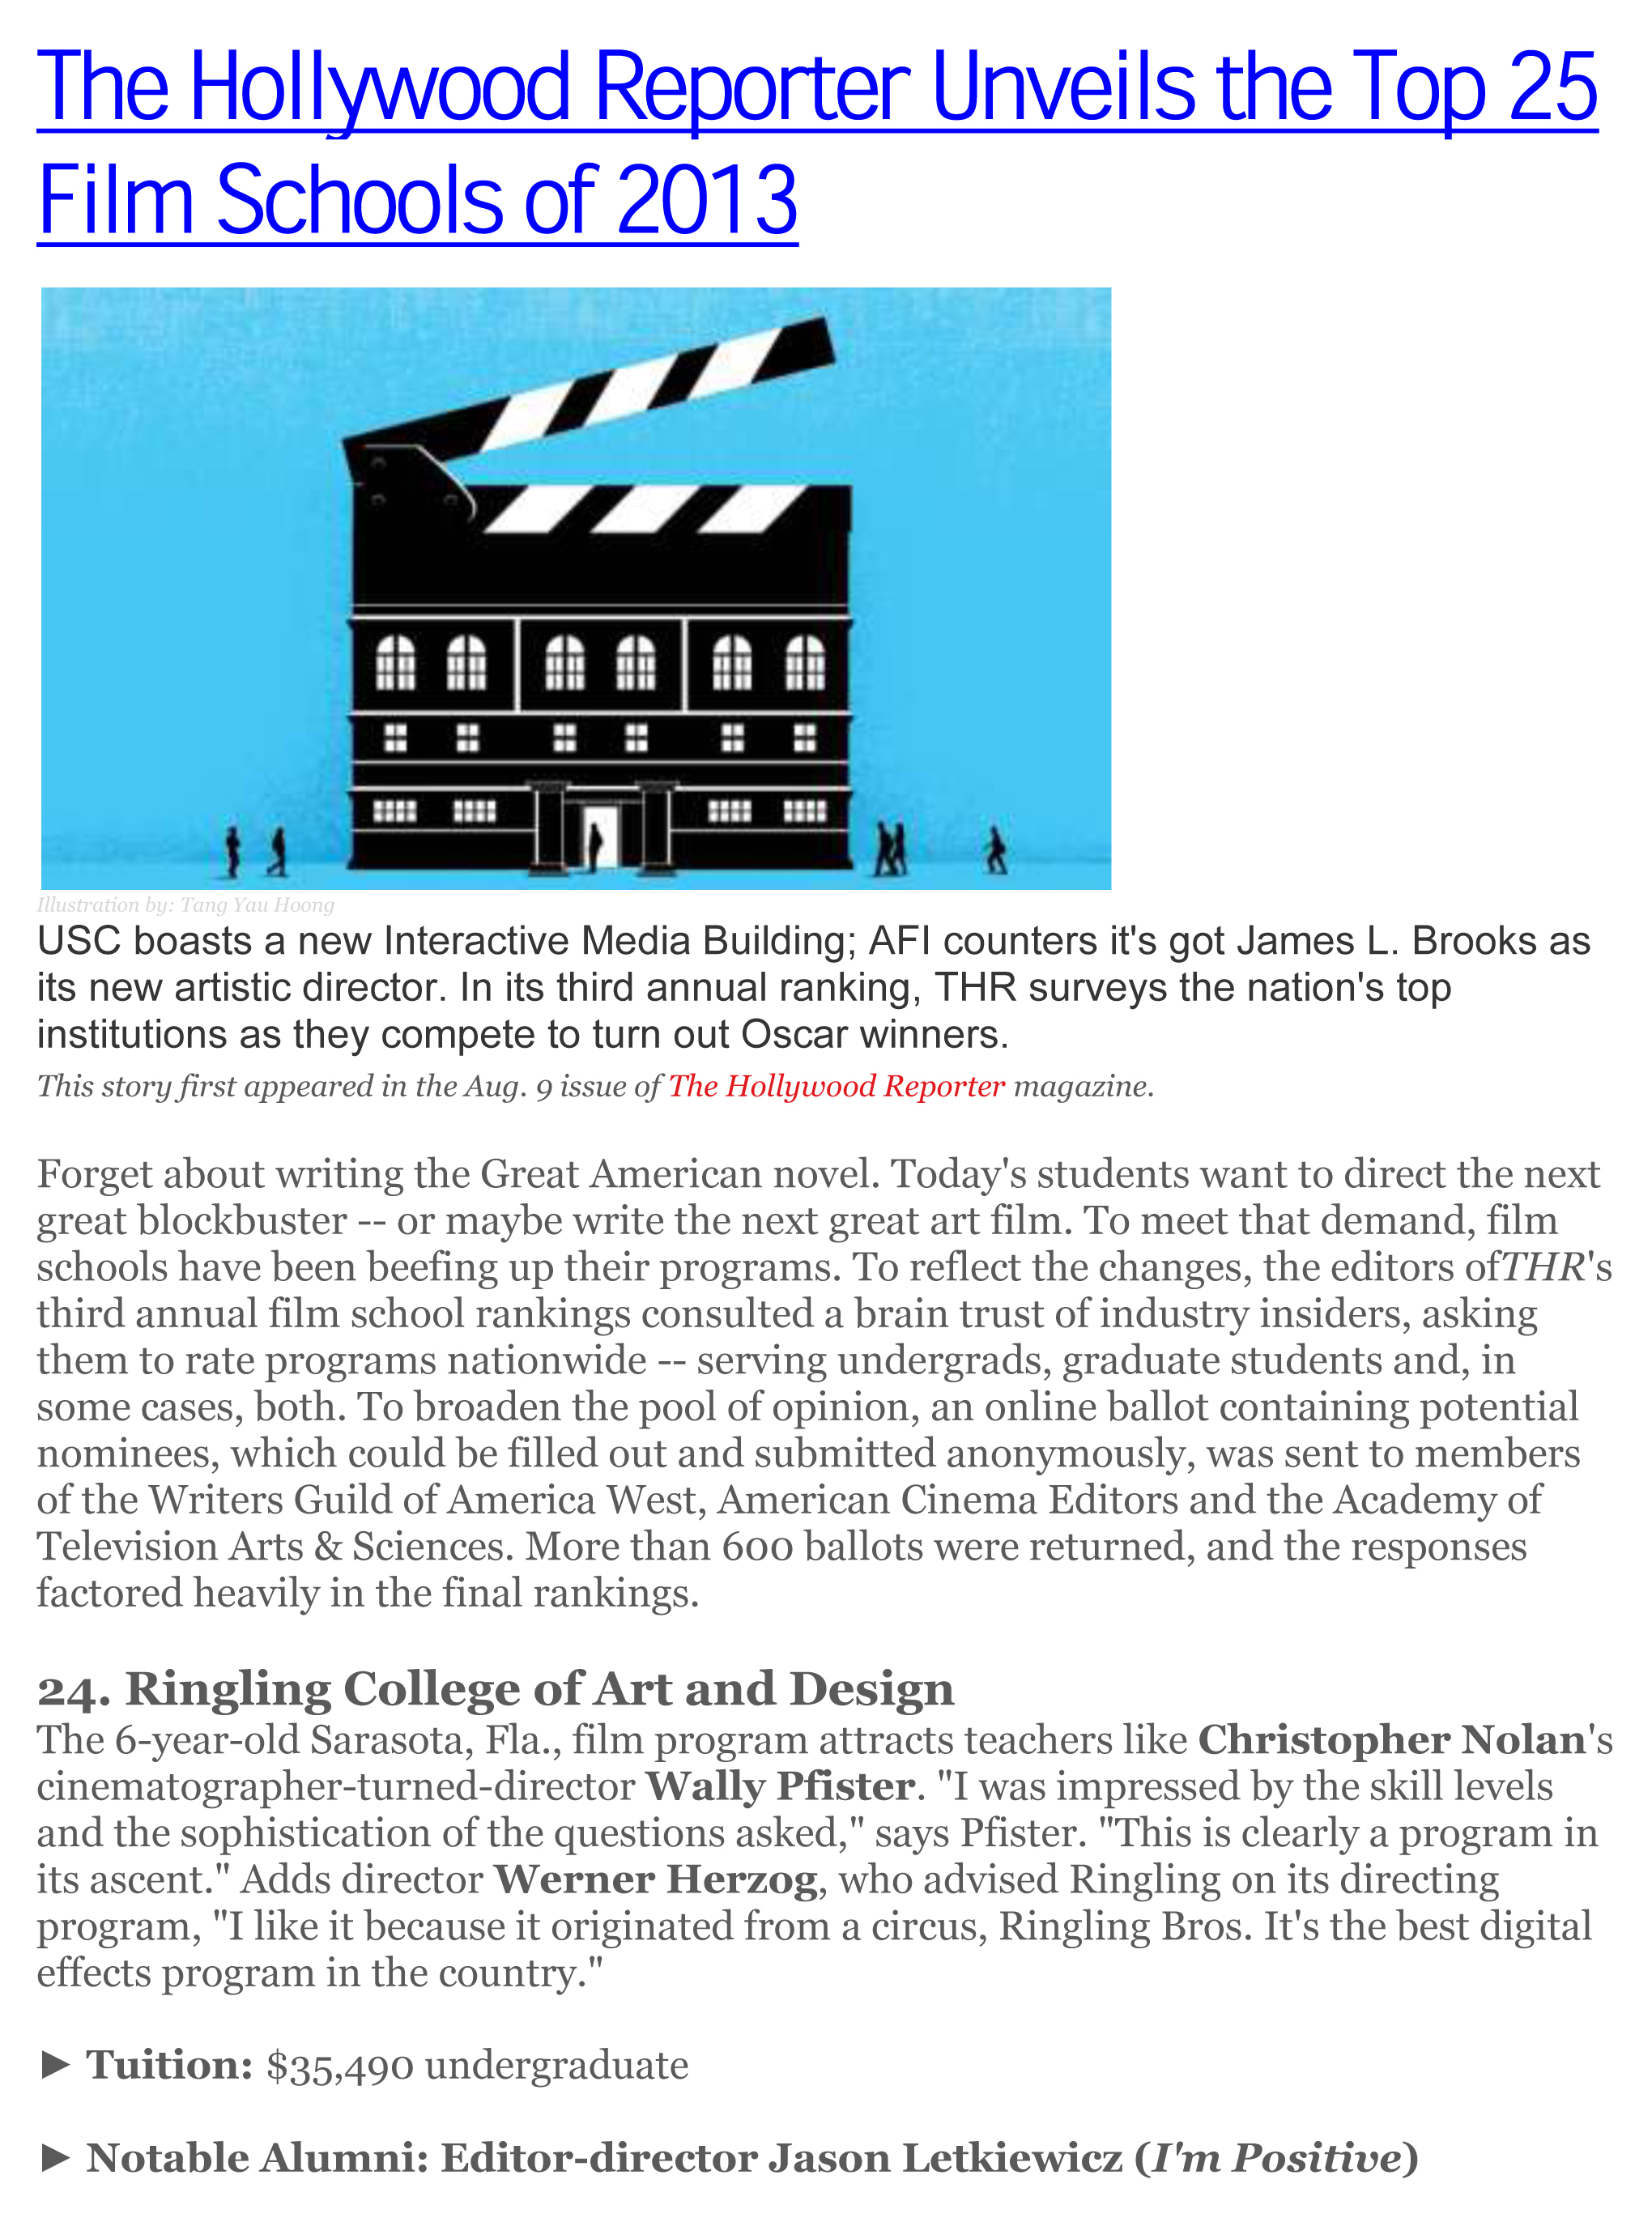 the hollywood reporter best film schools